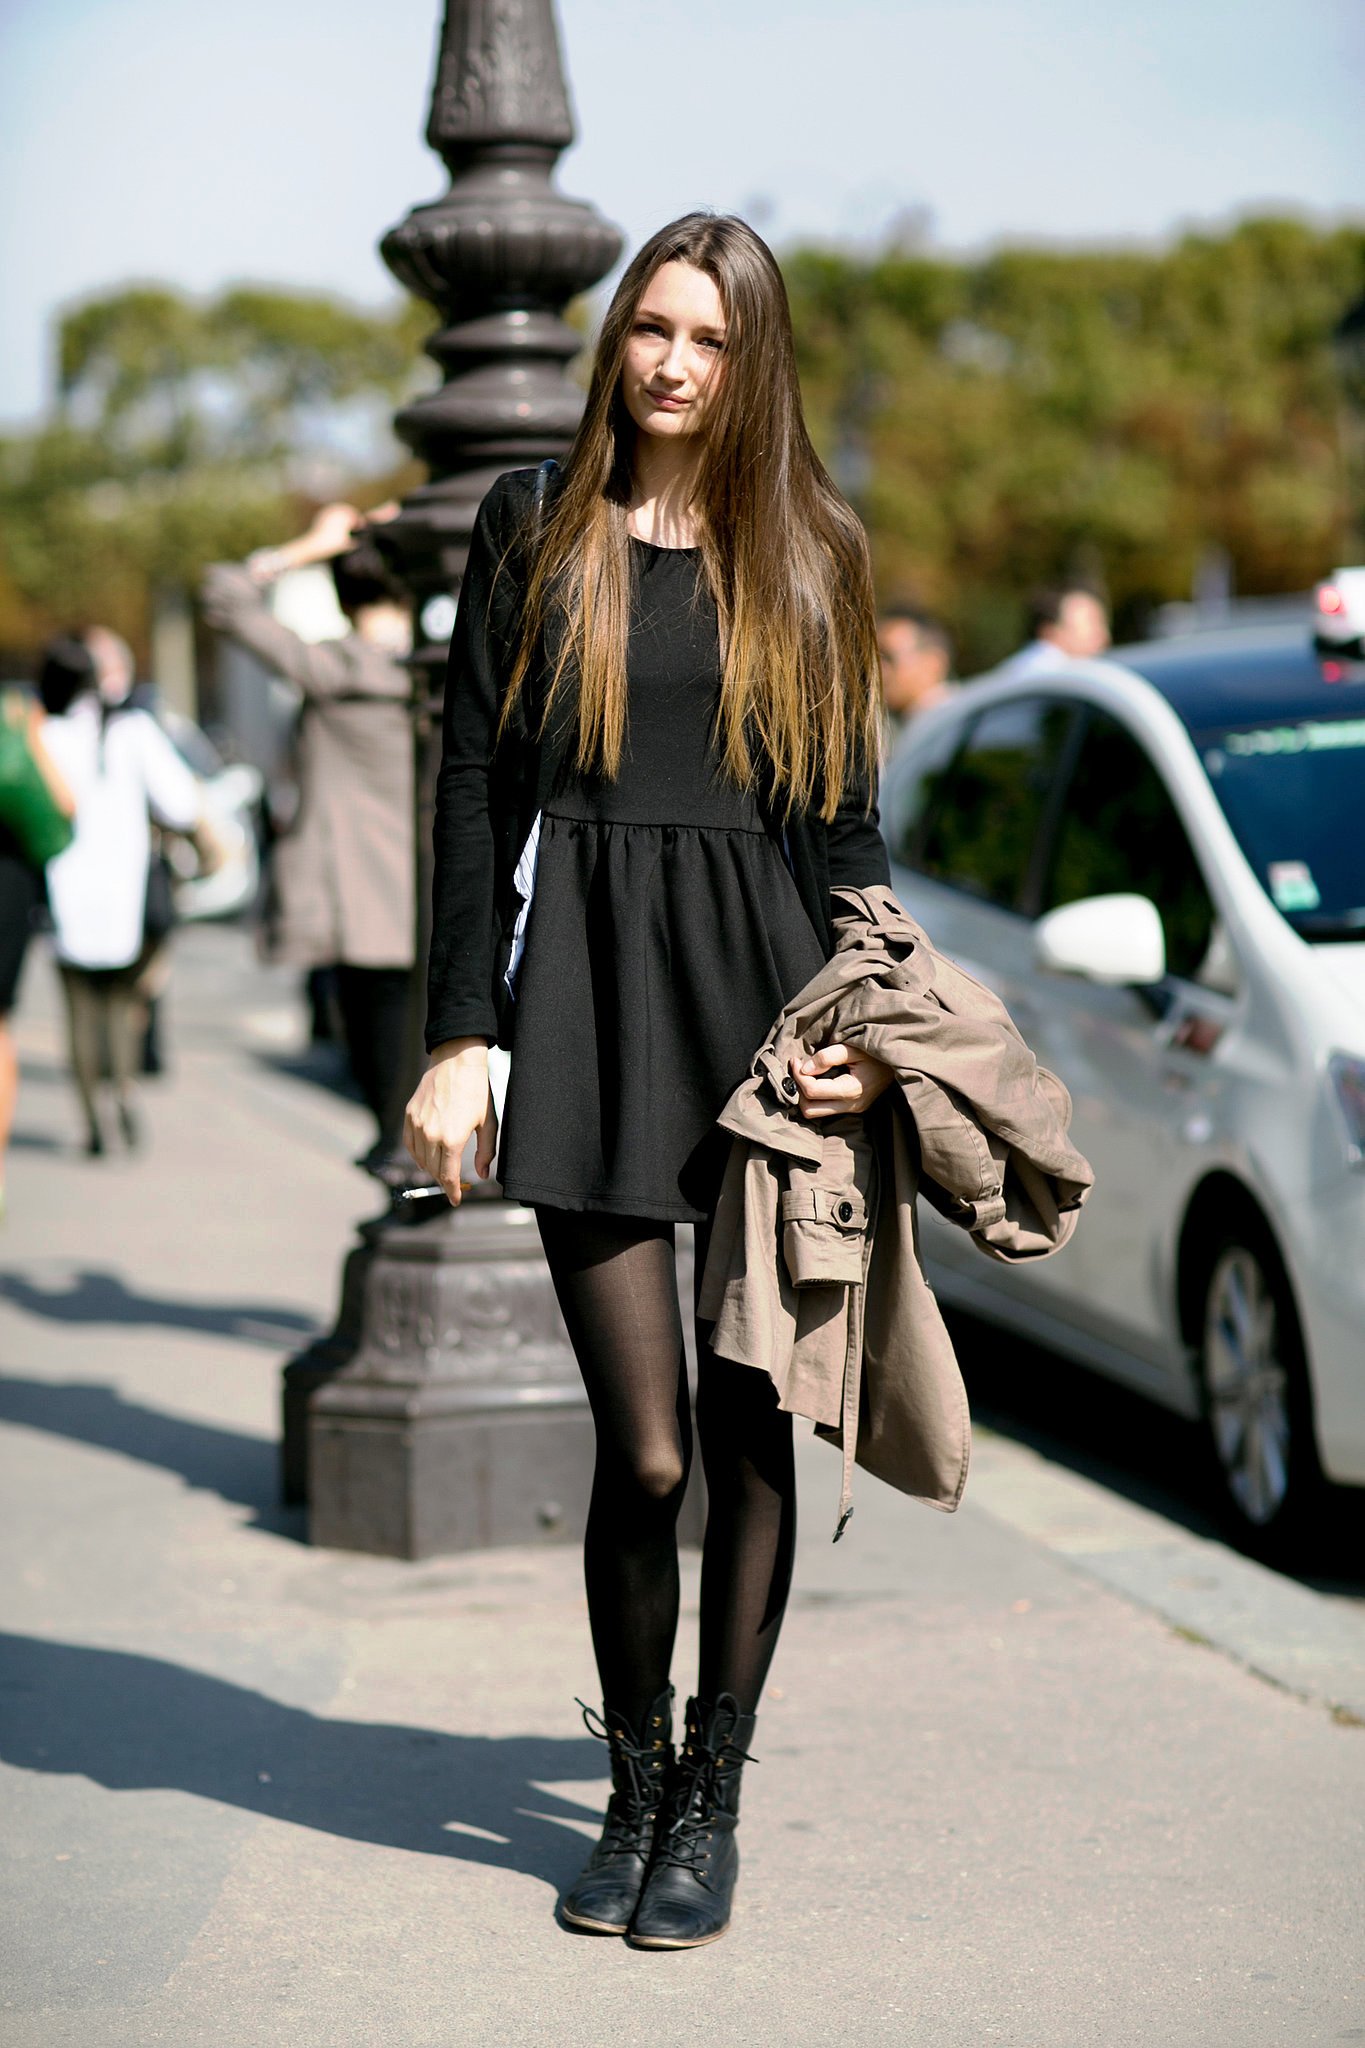 Little Black Dress with Tights and Boots